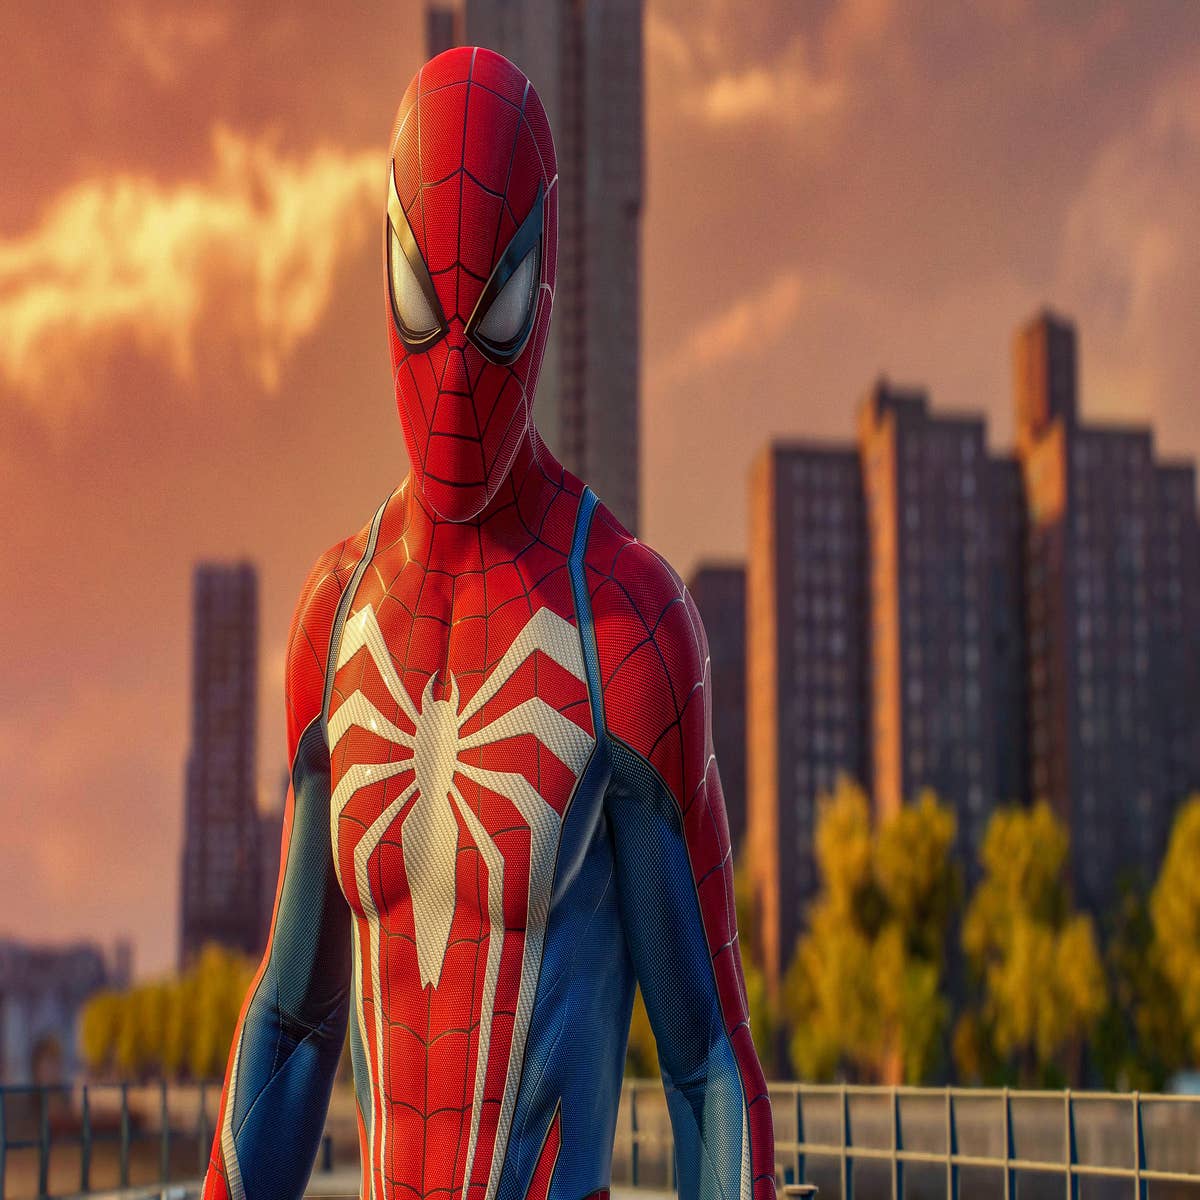 Spider-Man 2: The Game - Metacritic